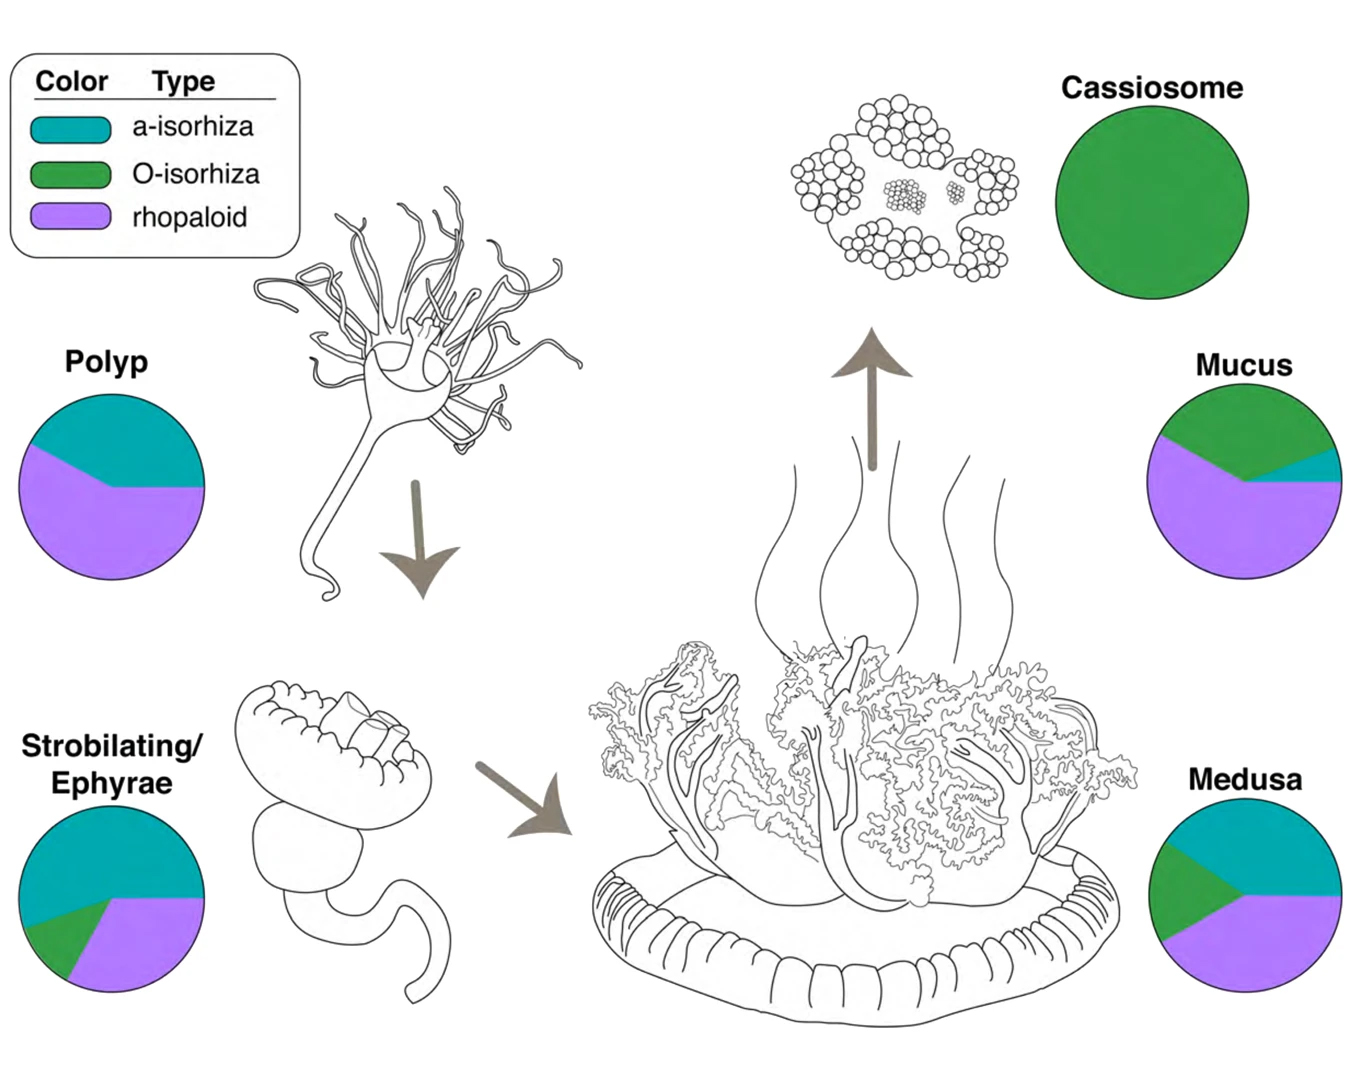 Life cycle stages of C. xamachana and its cassiosome-laden mucus. (Ames et al., Communications Biology, 2020)